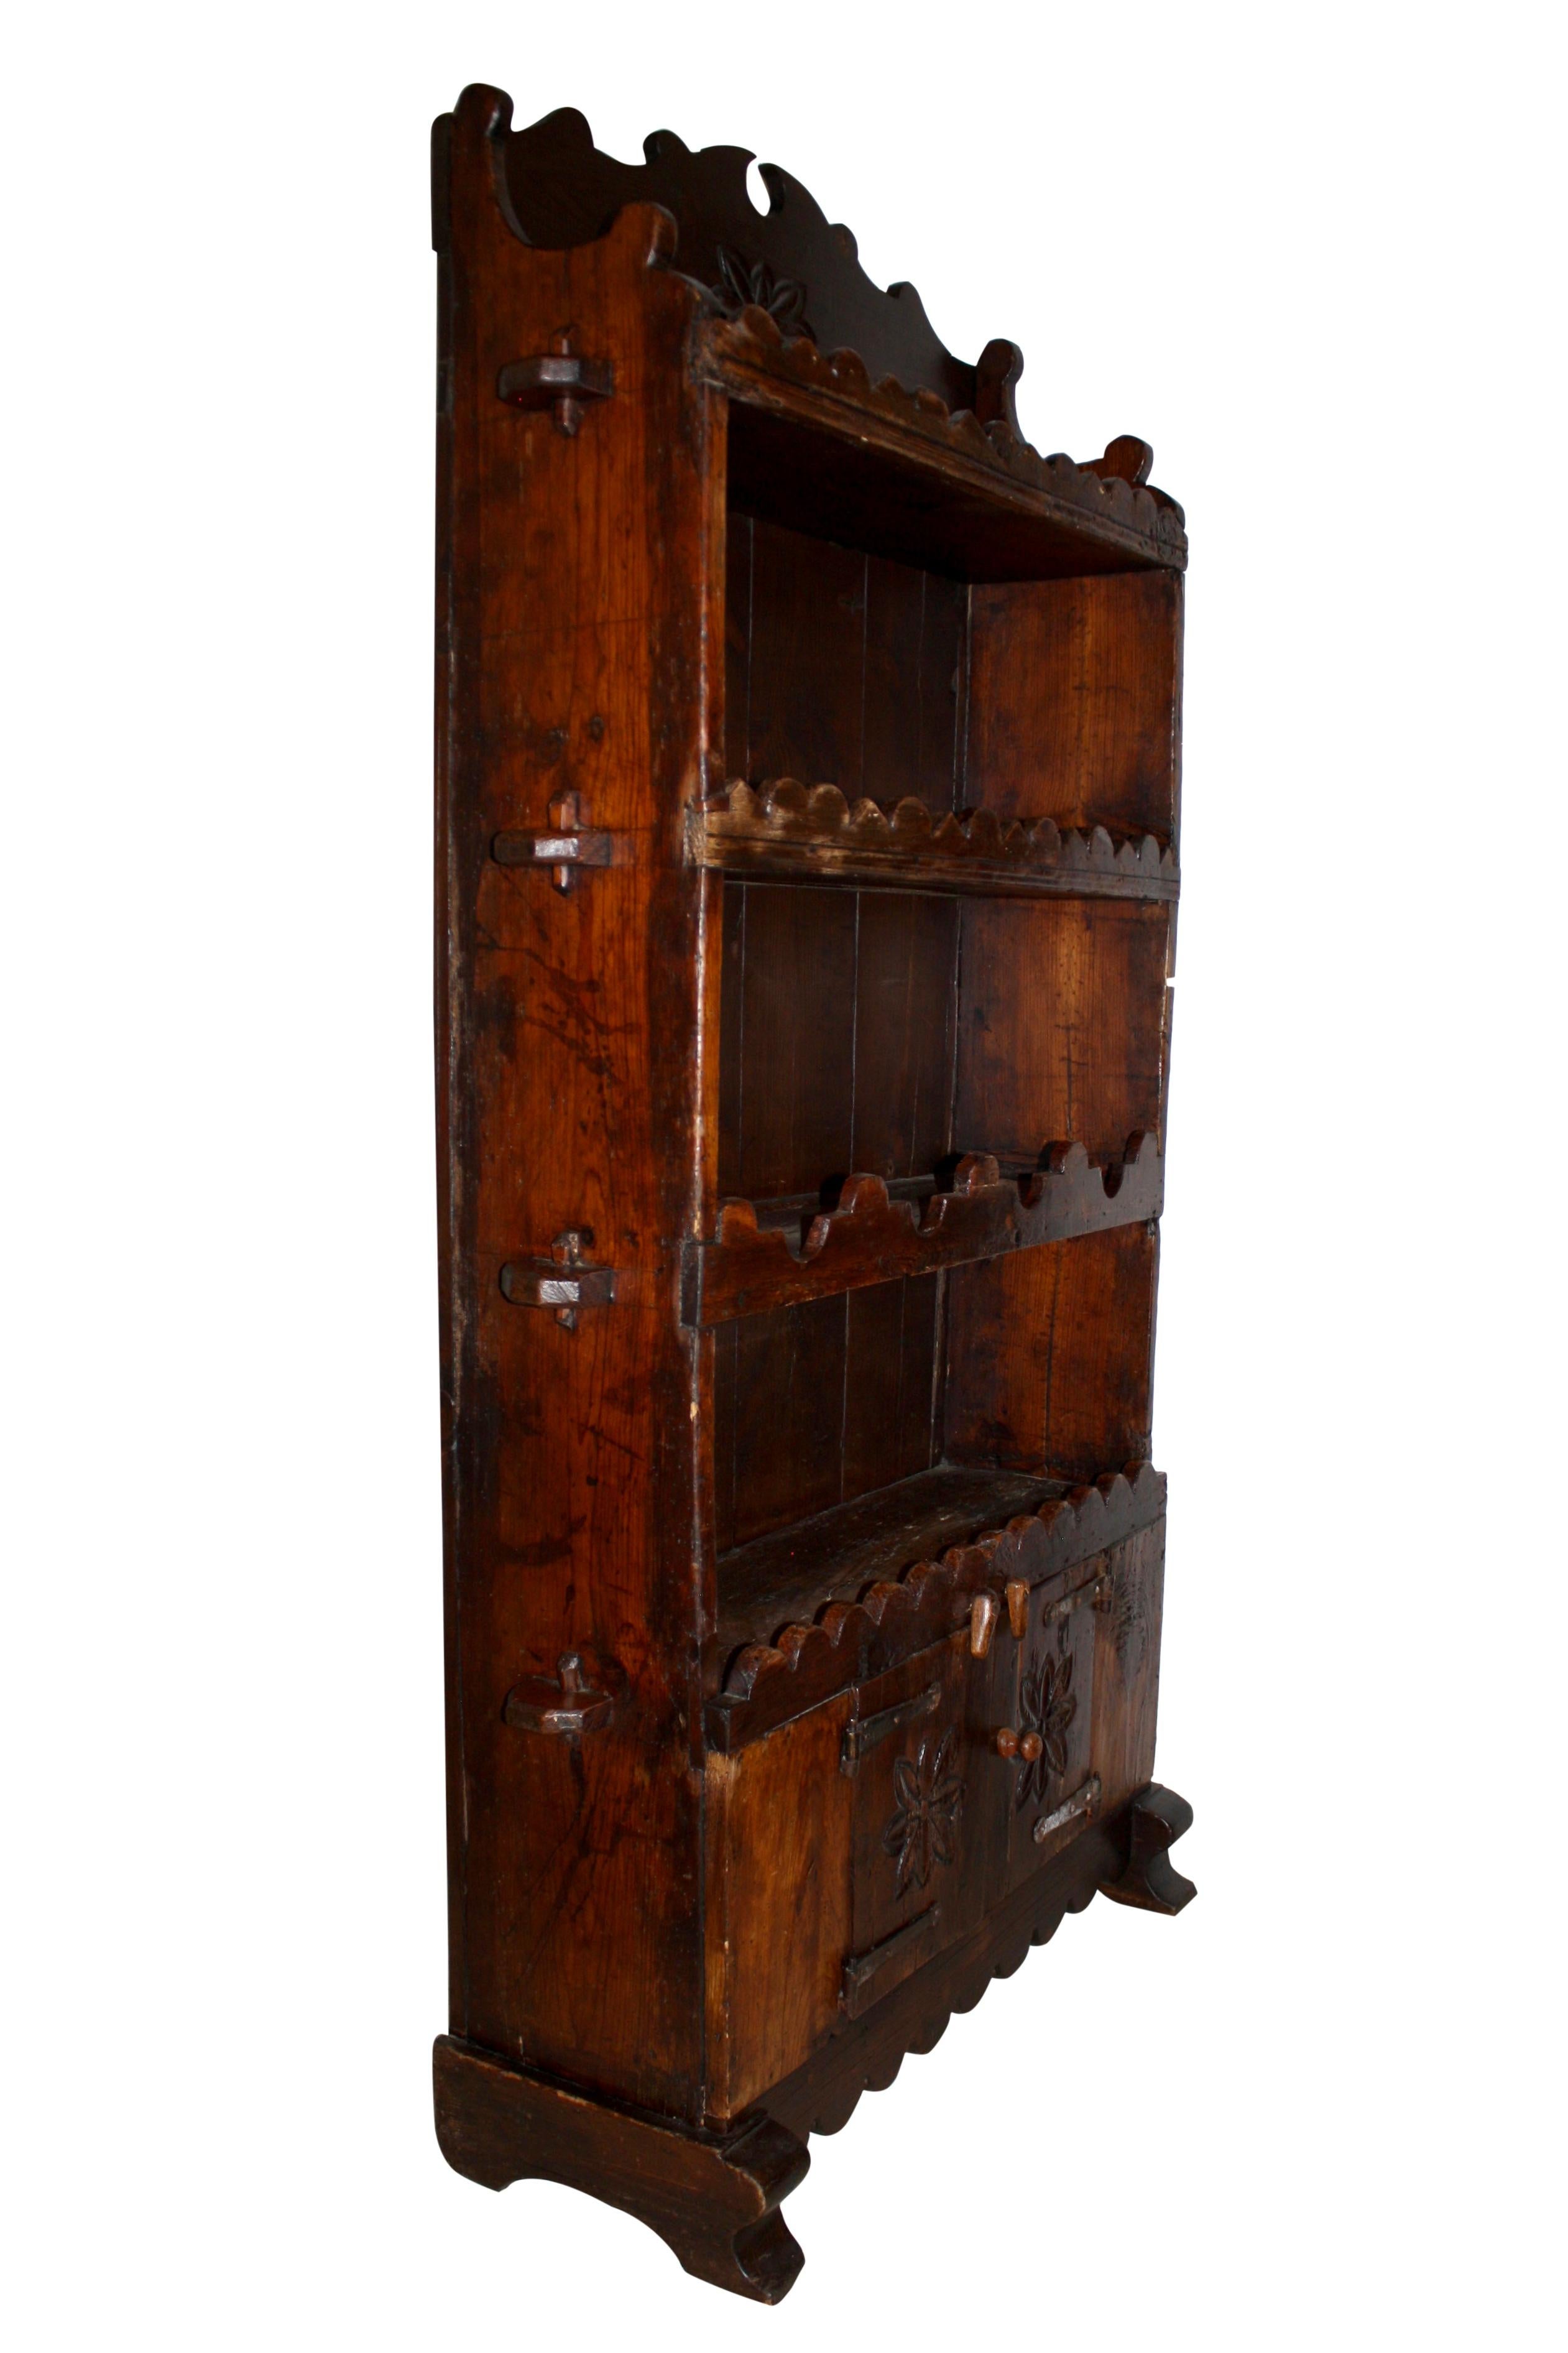 Comprised of four shelves with decorative trim and tusk tenon joinery, a two-door cabinet with long iron hinges, a broken pediment, and hand carved flowers, this oak bookcase brings a rustic, Old World charm to any room. The top three shelves have